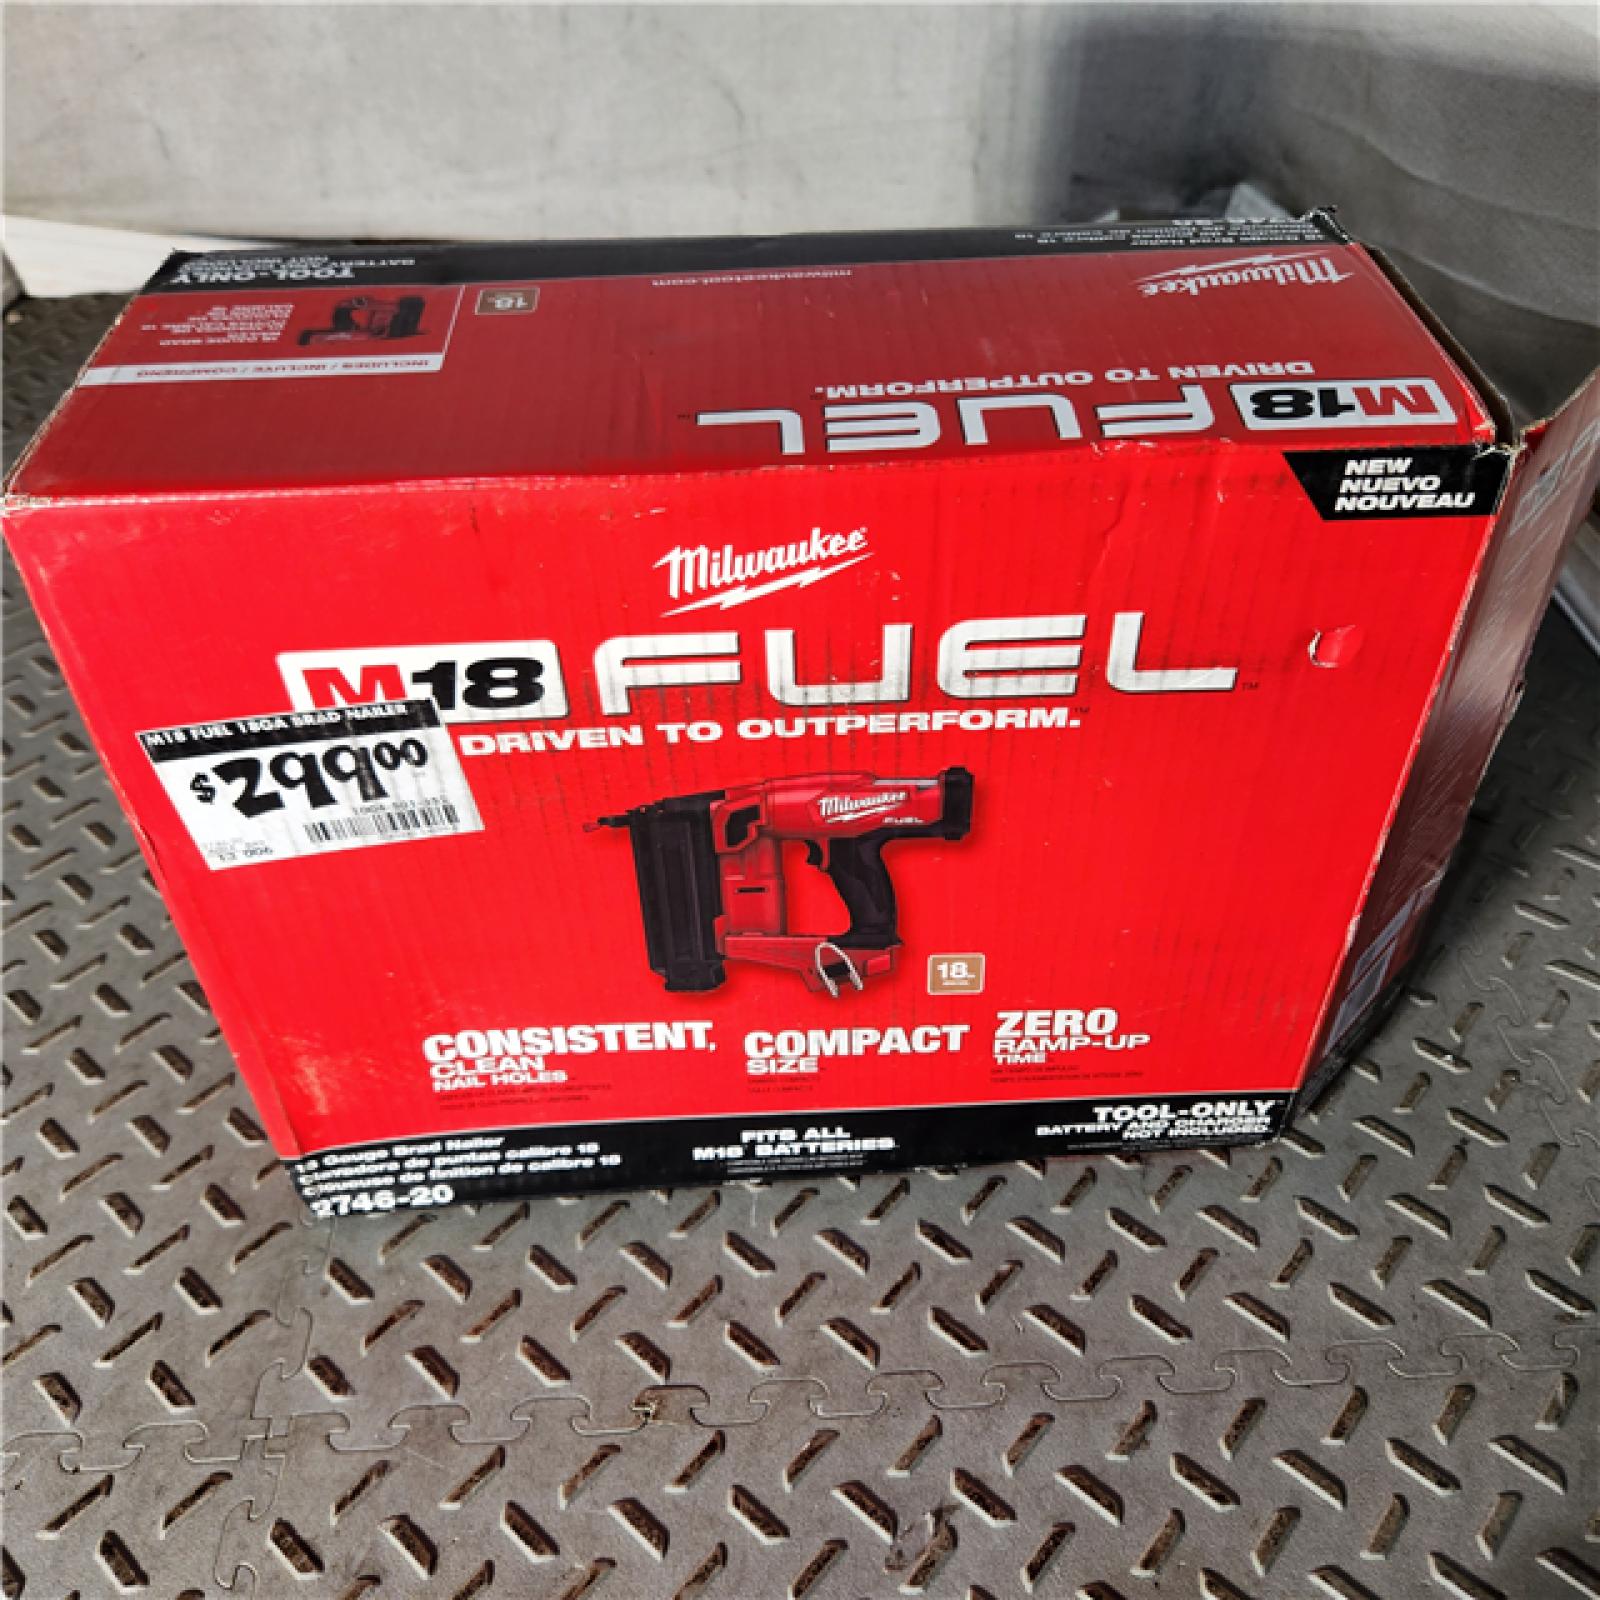 Houston location- AS-IS MILUWAKEE M18 FUEL 18-Volt Lithium-Ion Brushless Cordless Gen II 18-Gauge Brad Nailer (Tool-Only)